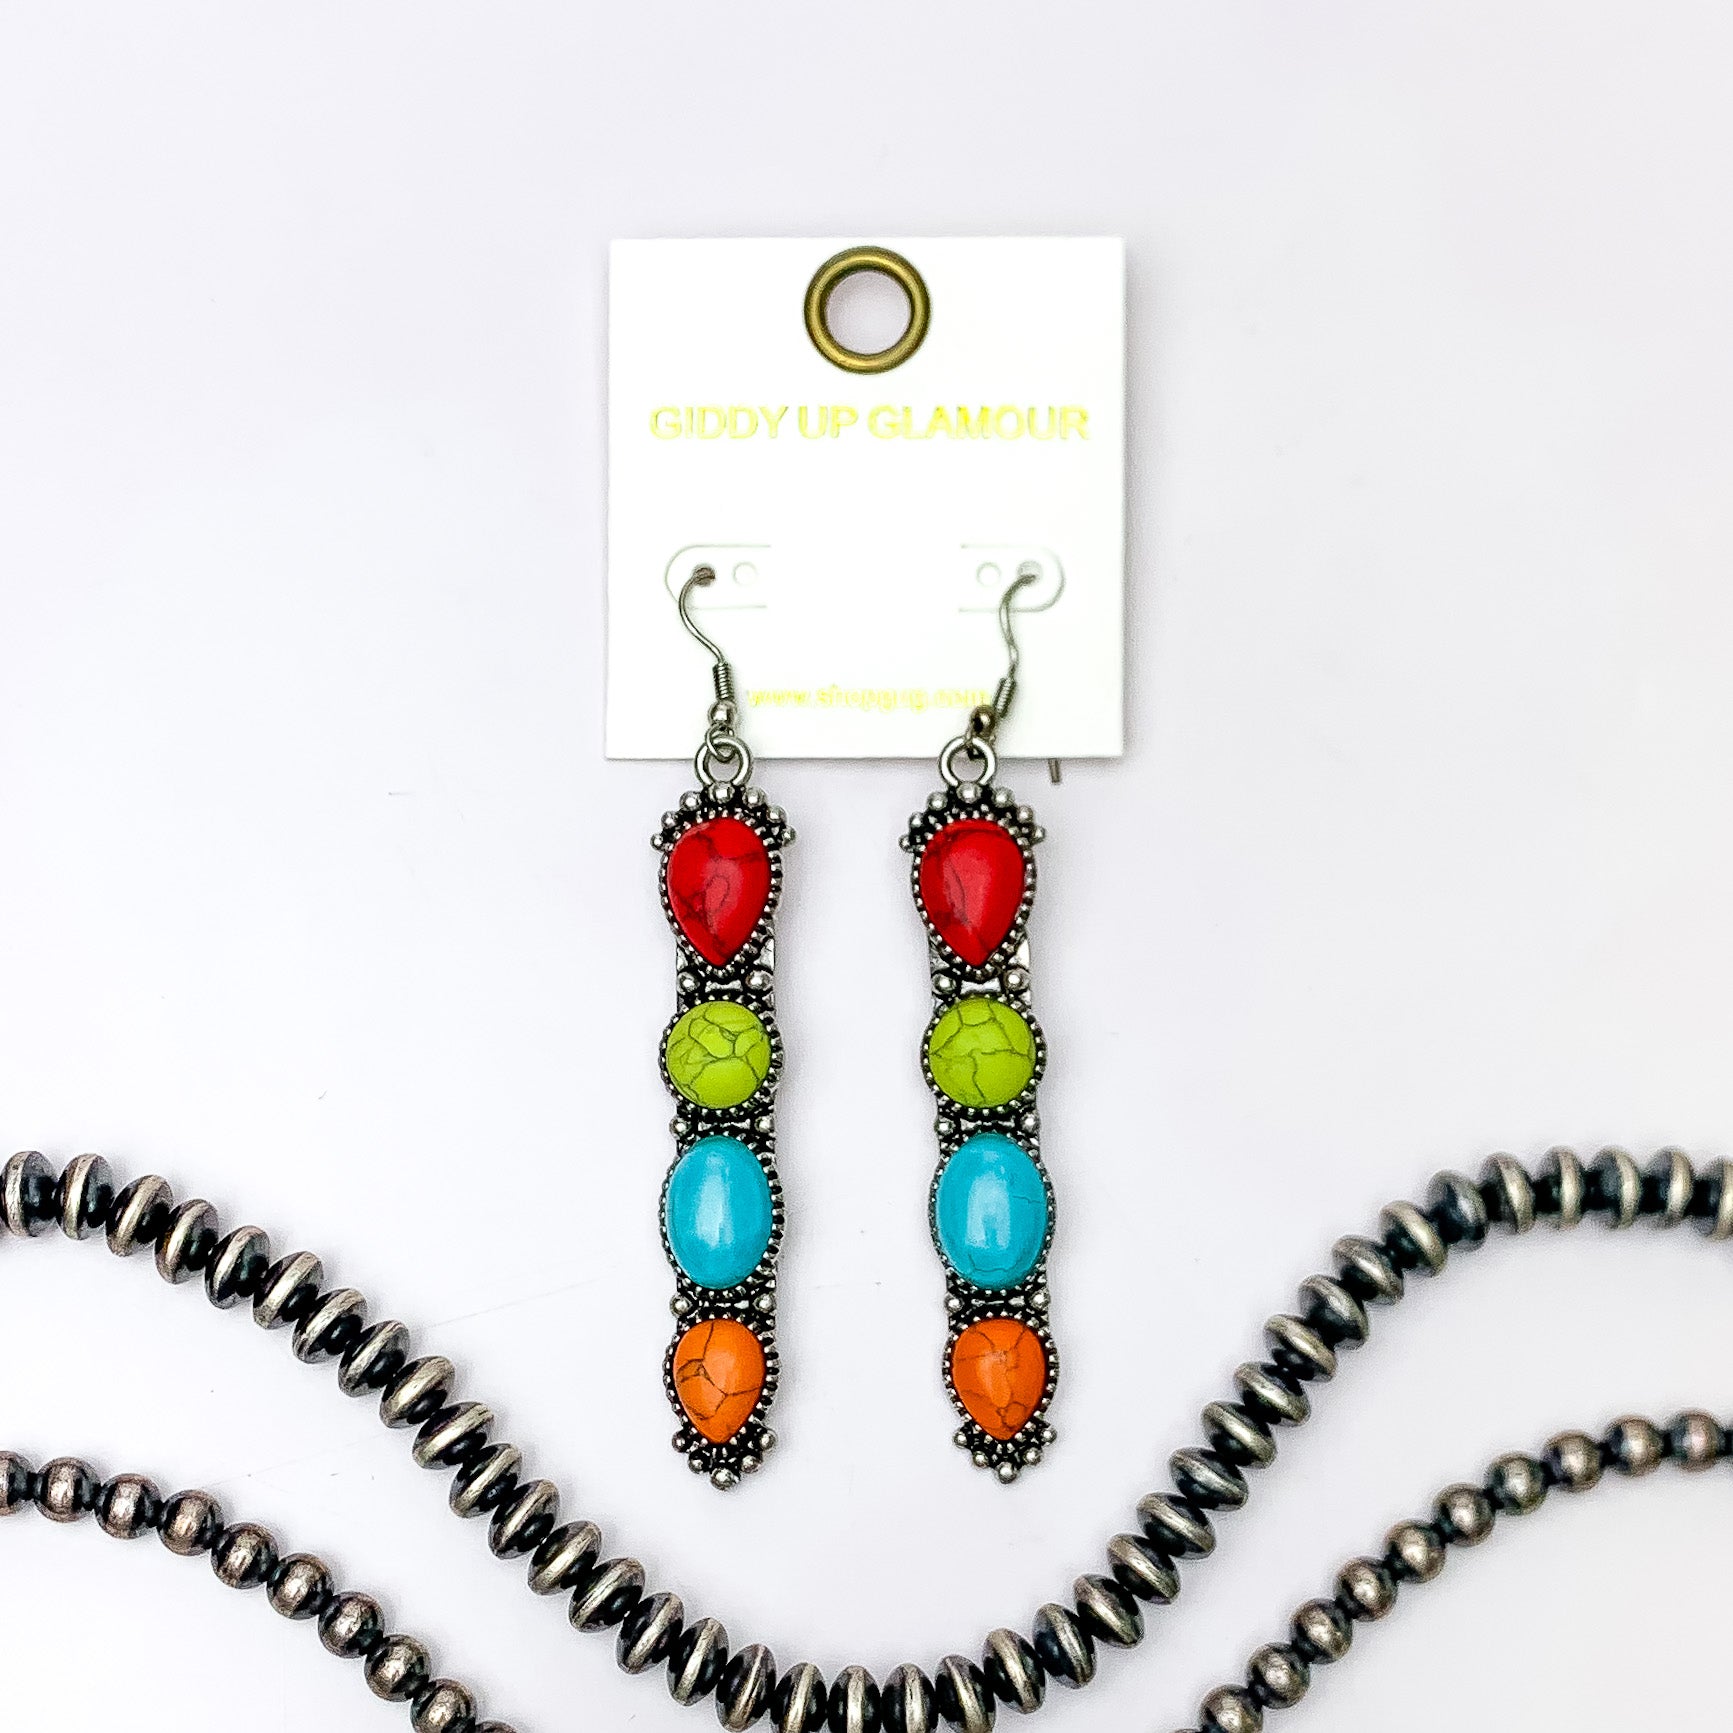 Silver fish hook earrings with a four, multicolor stone pendant. These earrings are pictured on a white background with silver beads at the bottom of the picture. 